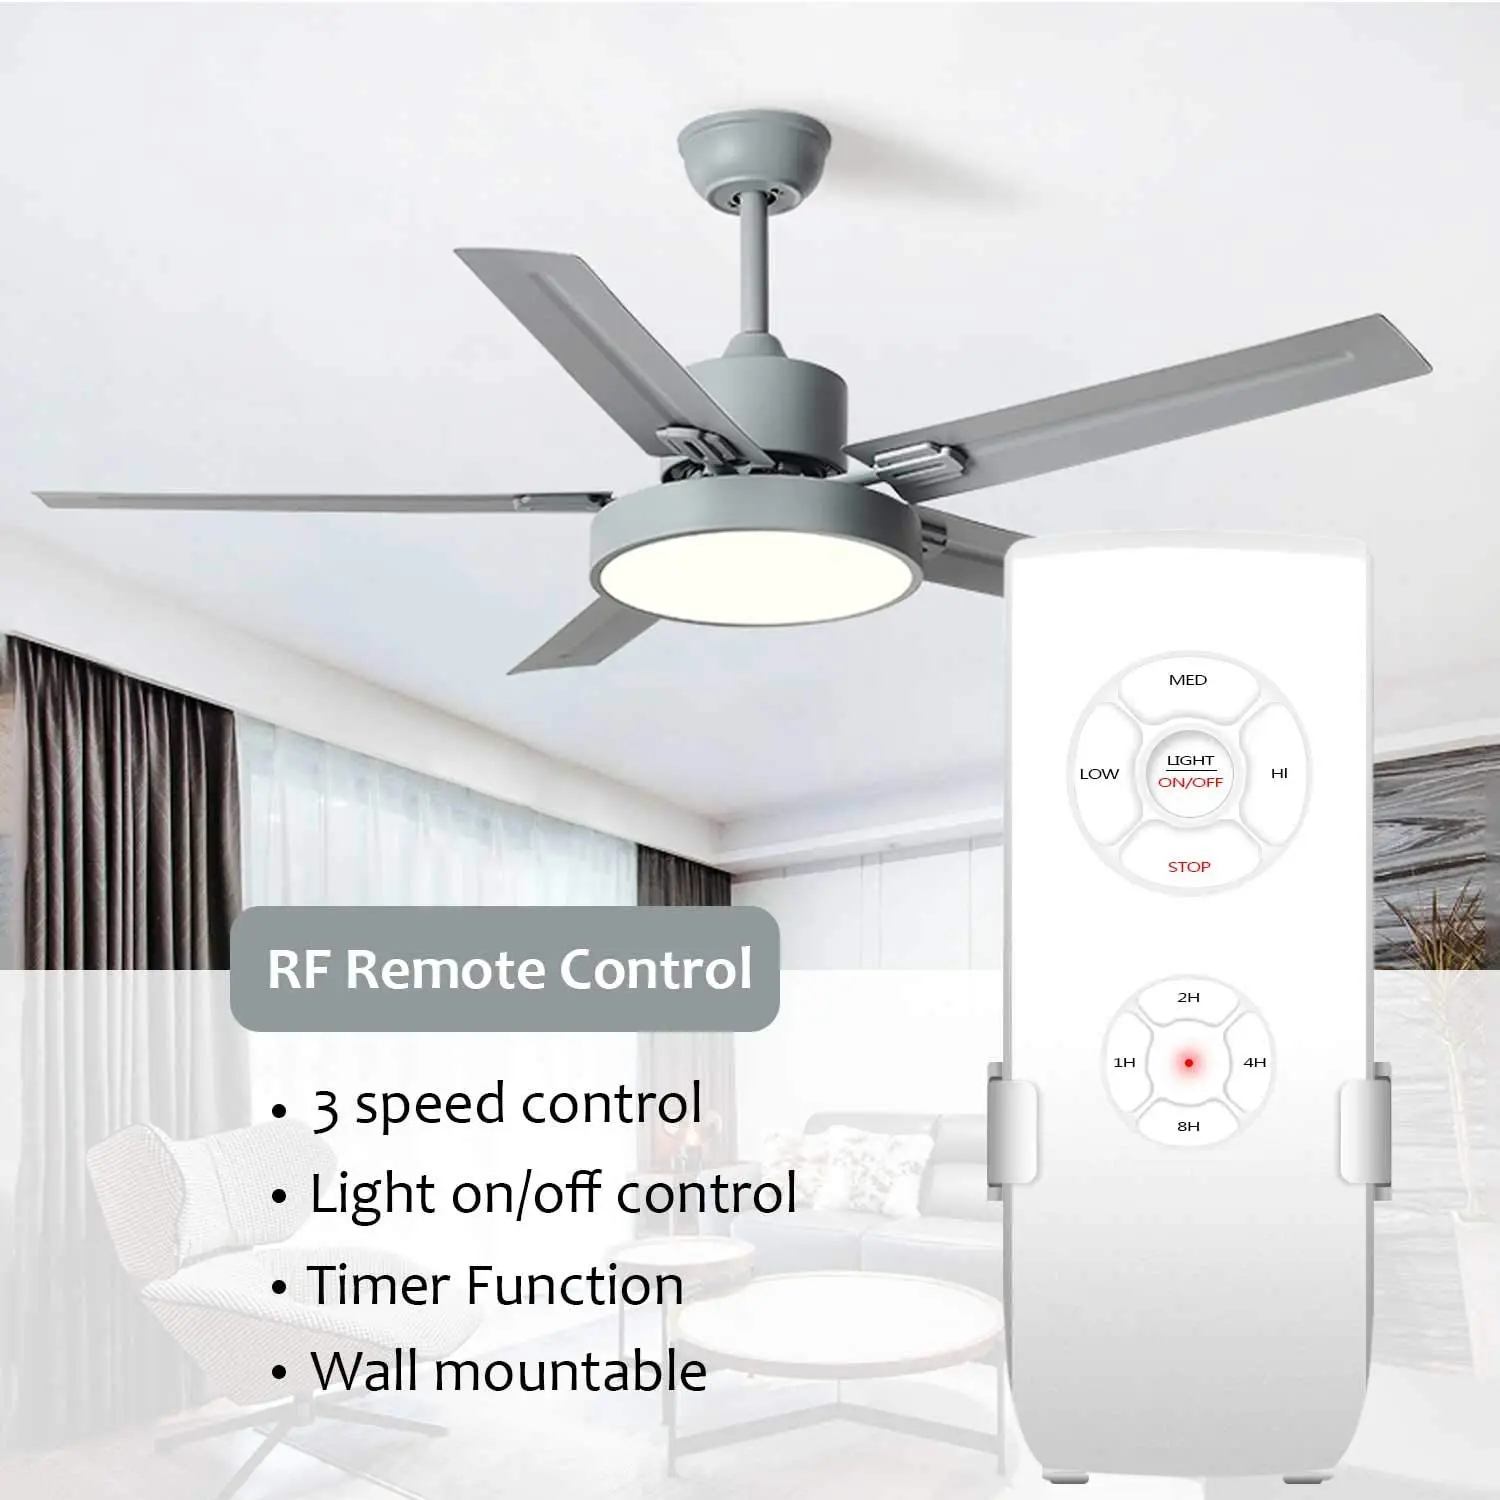 
WiFi Smart Ceiling Fan Light Controller Kit RF/APP Remote Control for Ceiling Fan Compatible with Alexa and Google Home Assist 